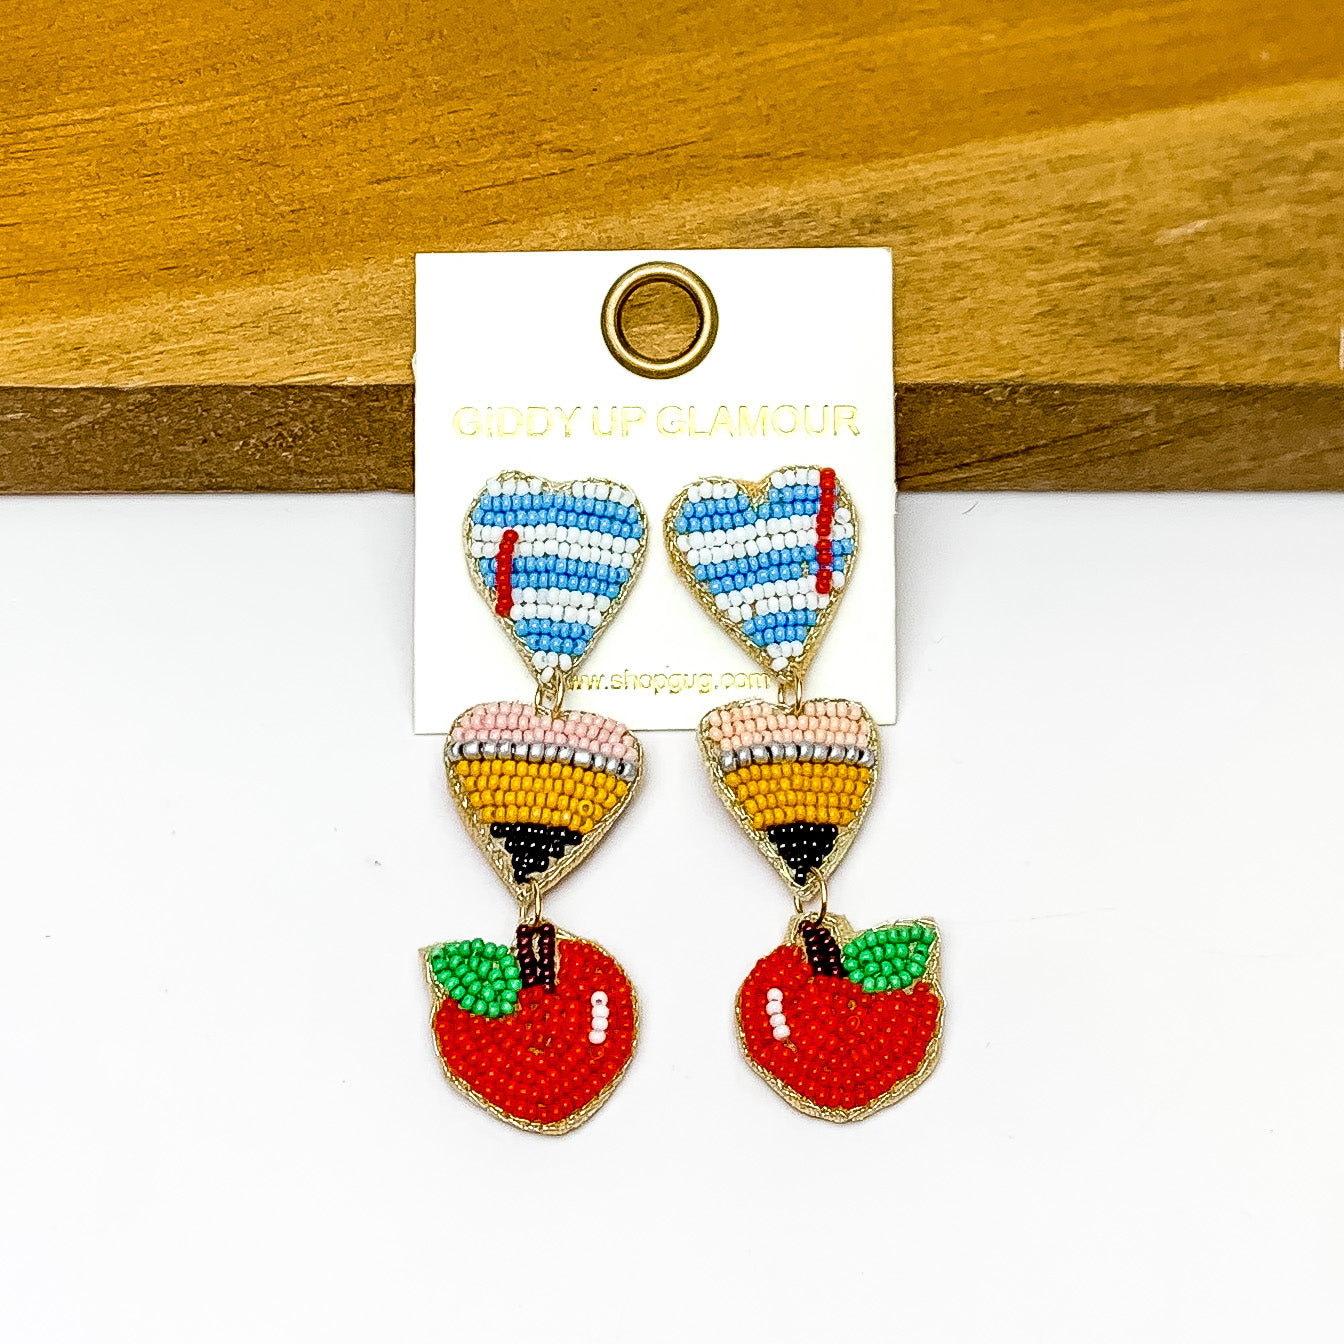 Teaching Inspired Three Tiered Beaded Earrings. Pictured on a white background with the earrings against a wood piece.